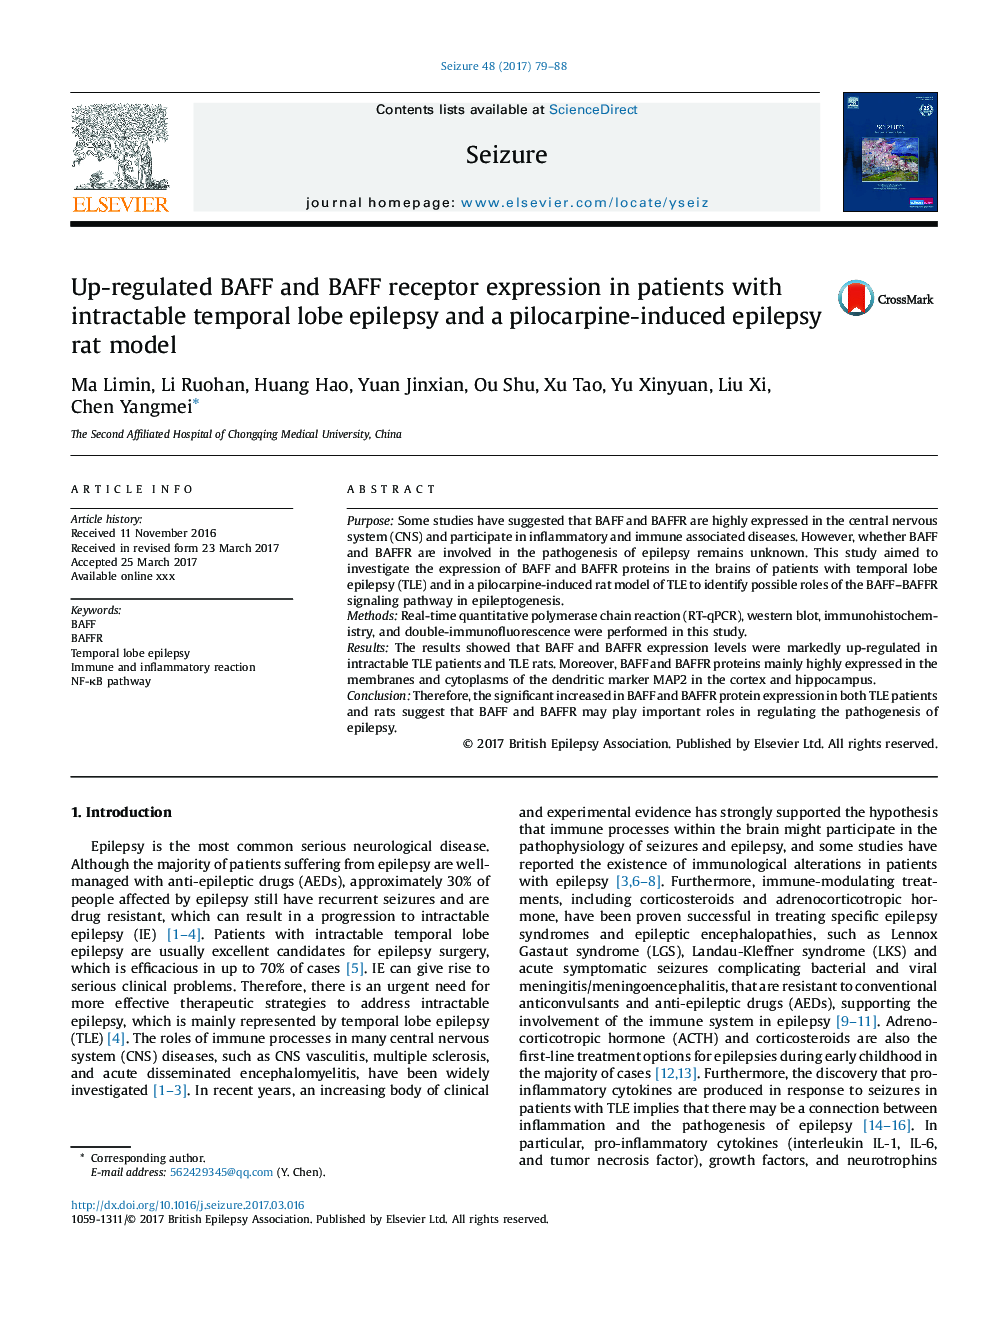 Up-regulated BAFF and BAFF receptor expression in patients with intractable temporal lobe epilepsy and a pilocarpine-induced epilepsy rat model